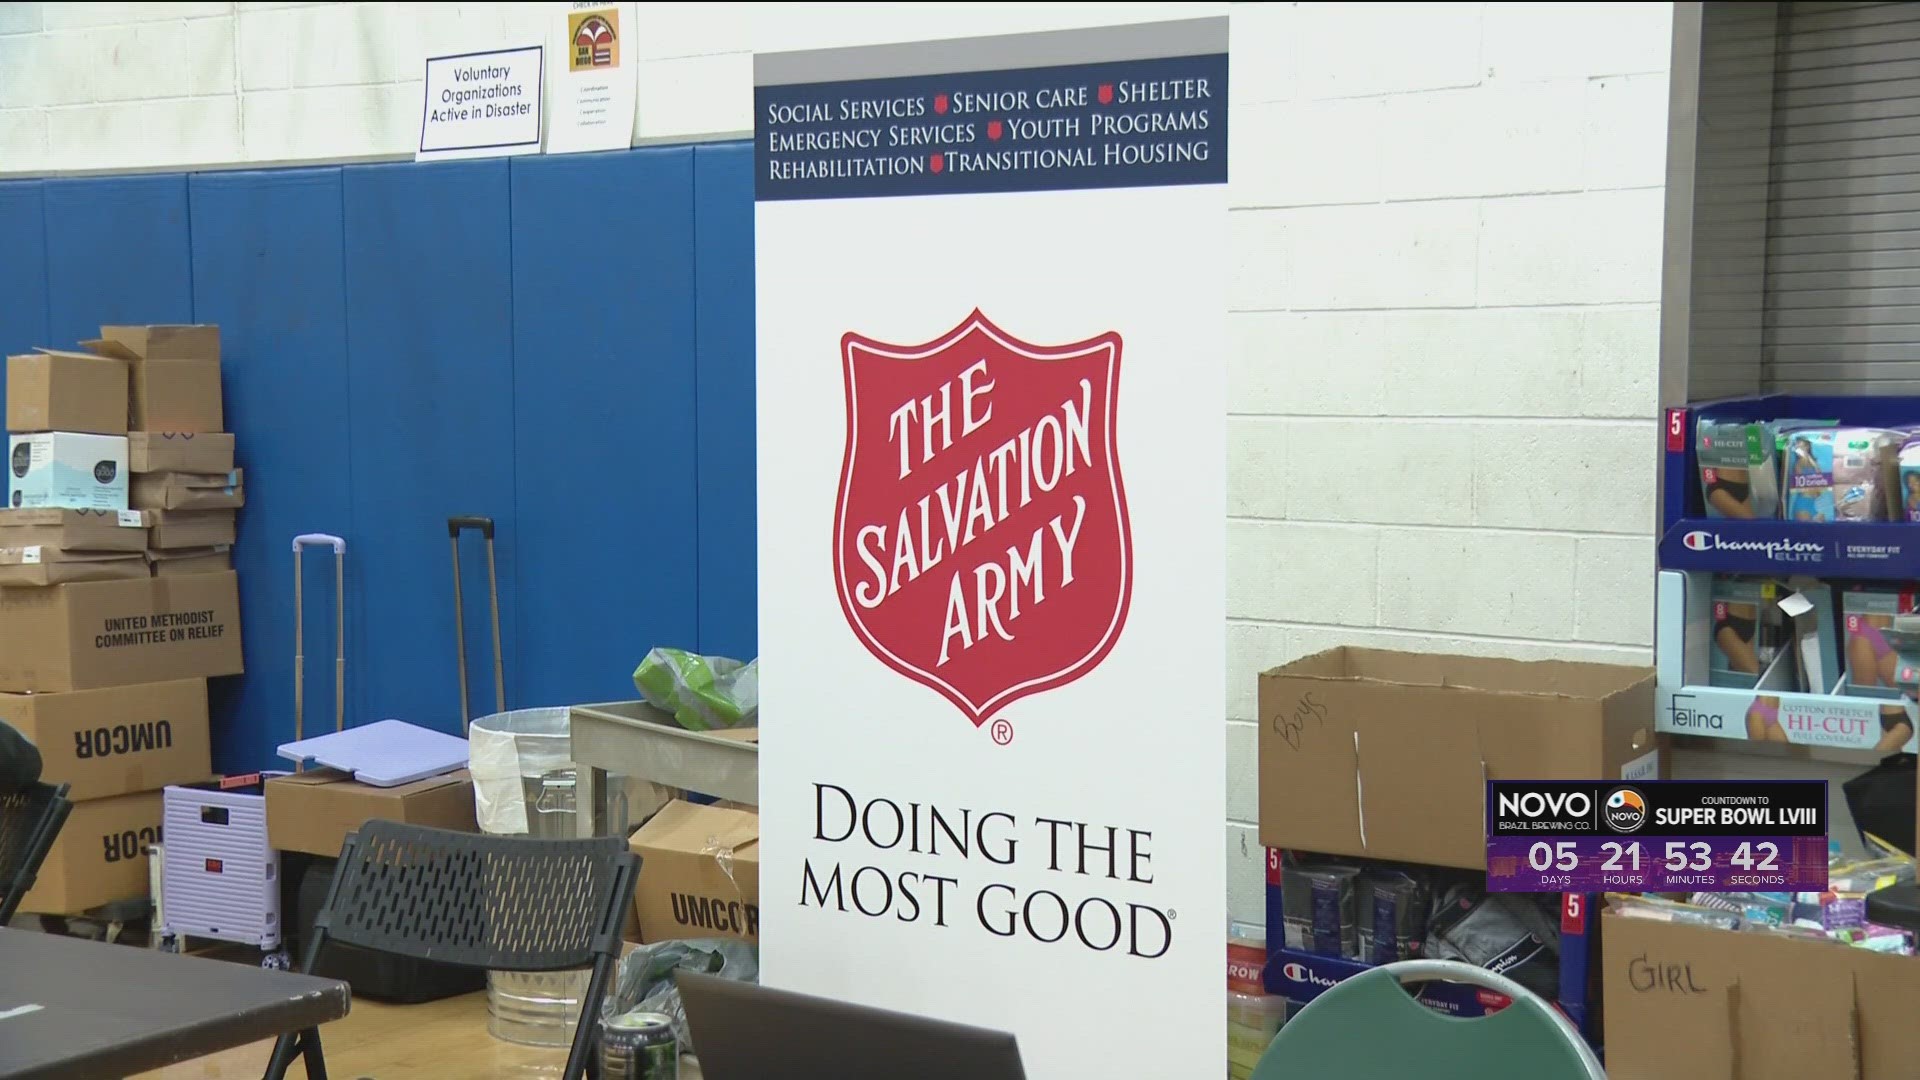 So far, the Salvation Army says more than 1,400 flood victims have received more than $37,000 in financial assistance.